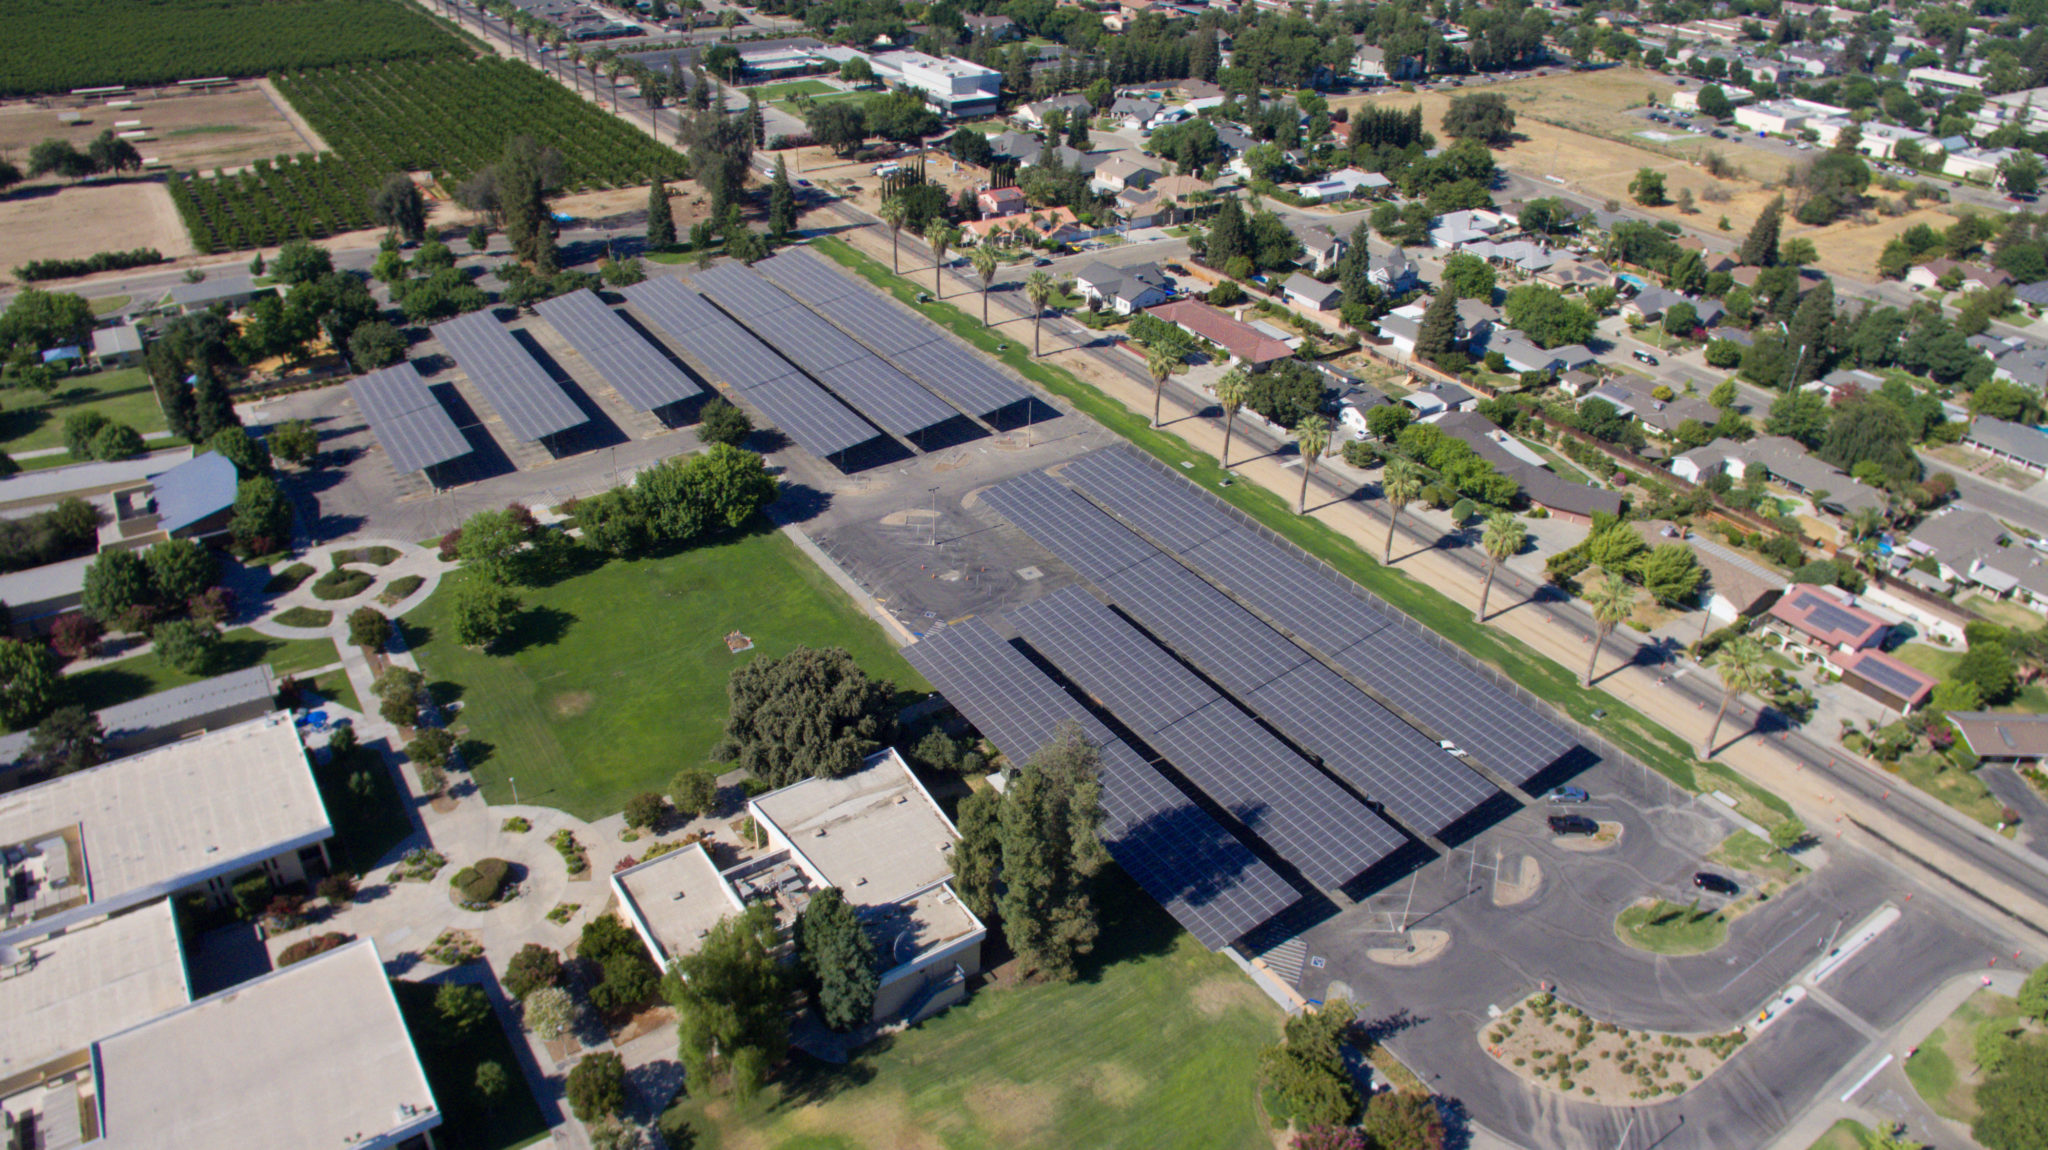 Aerial view of a solar carport constructed by Coldwell Solar in Fresno, California.